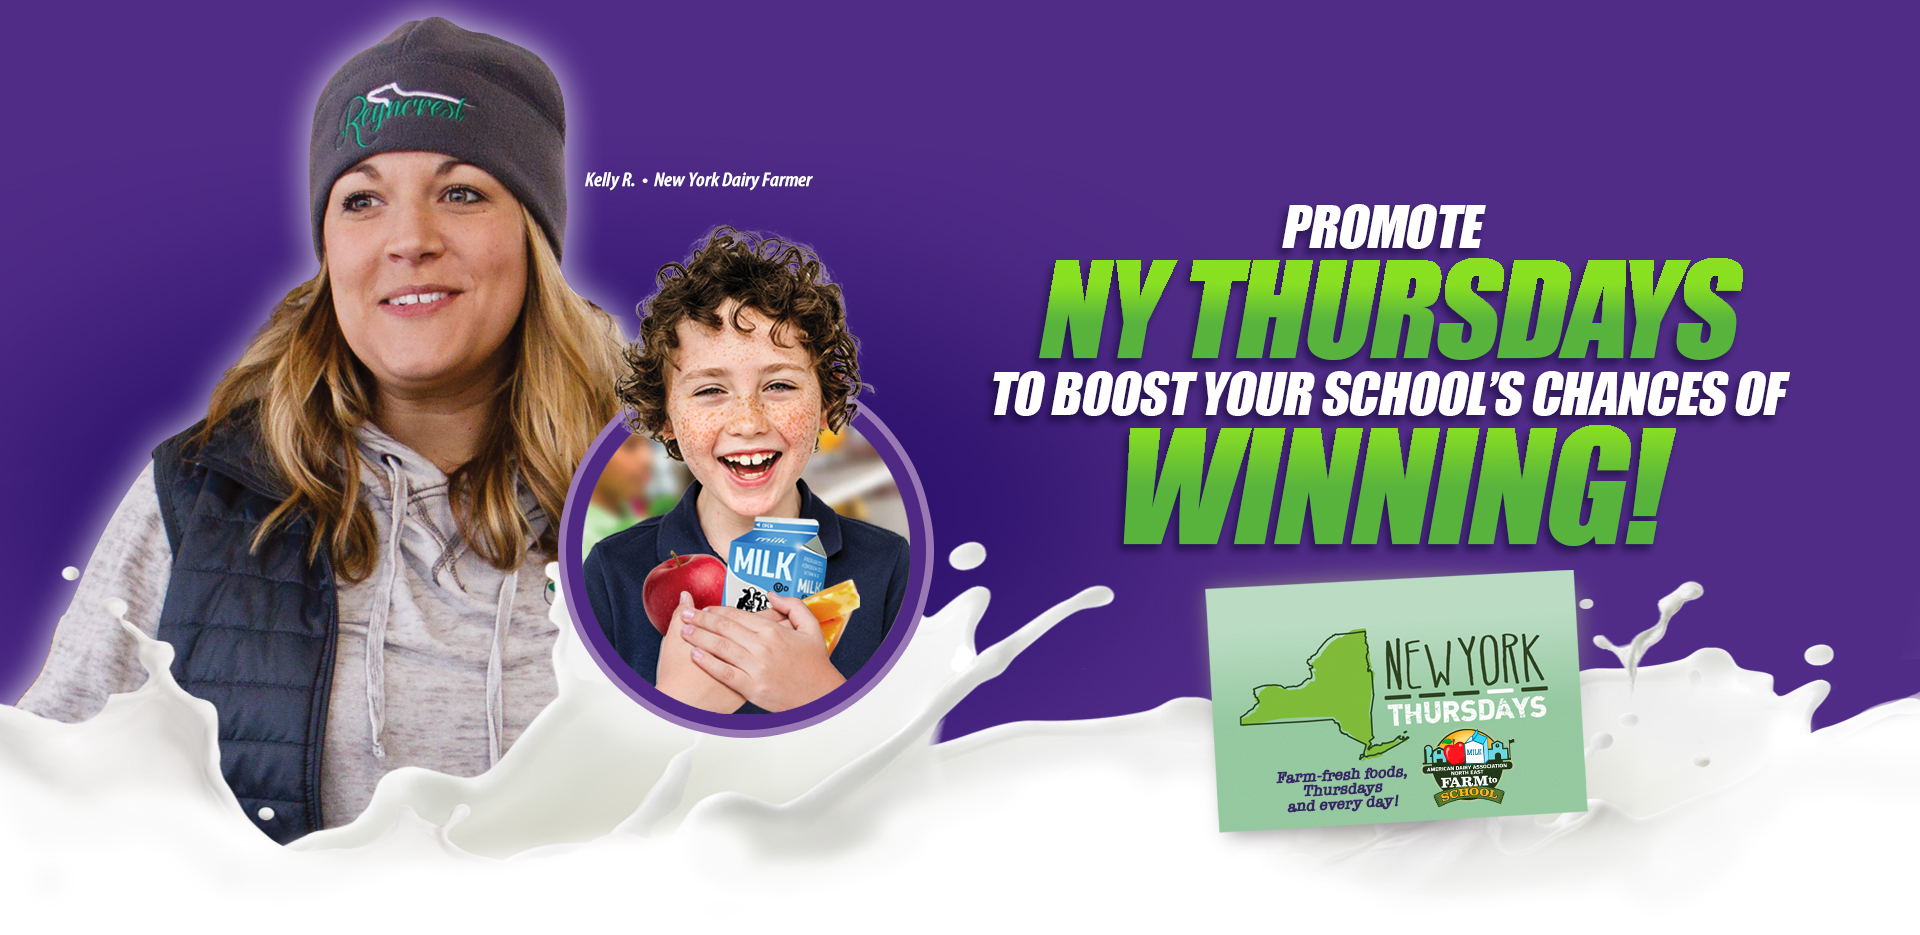 Promote NY Thursdays to boost your school's chances of winning